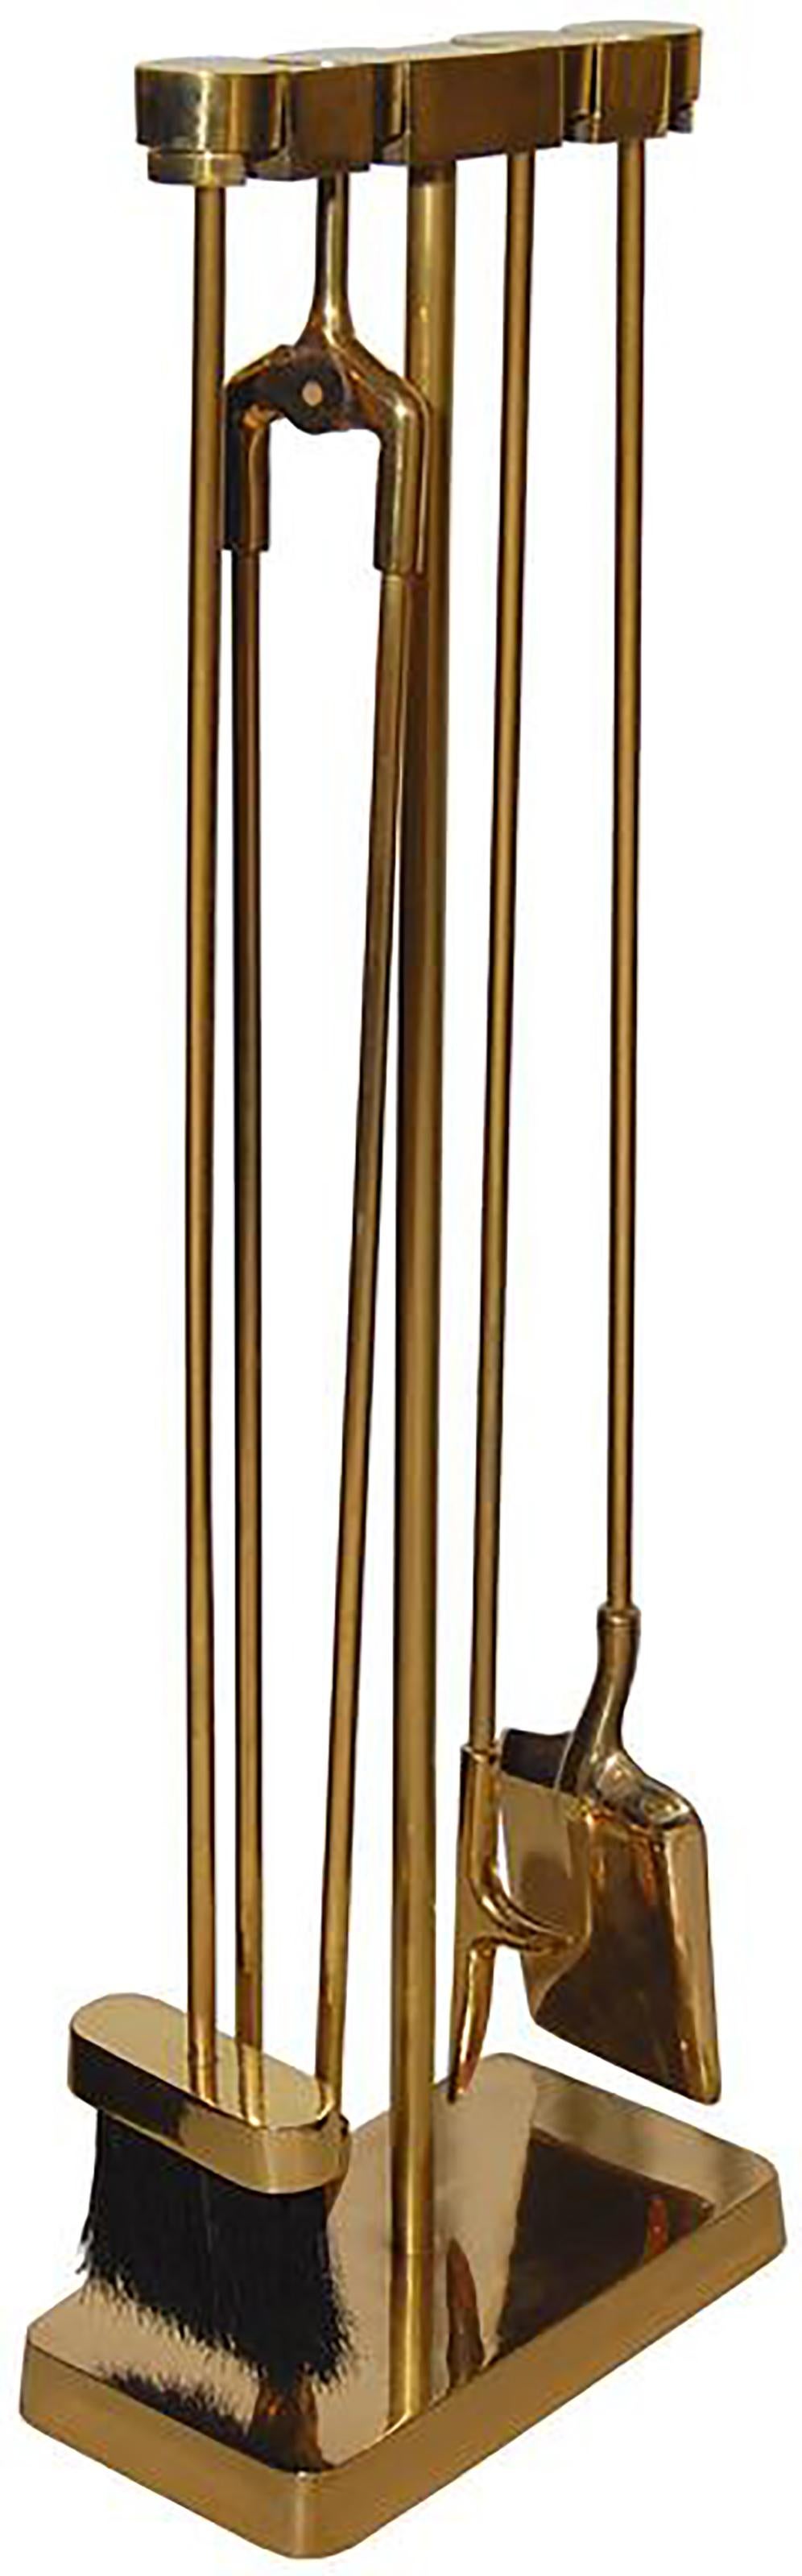 Minima Bronze Fireplace Tool Set by Nancy Ruben for Craig Van Den Brulle In Excellent Condition For Sale In New York, NY